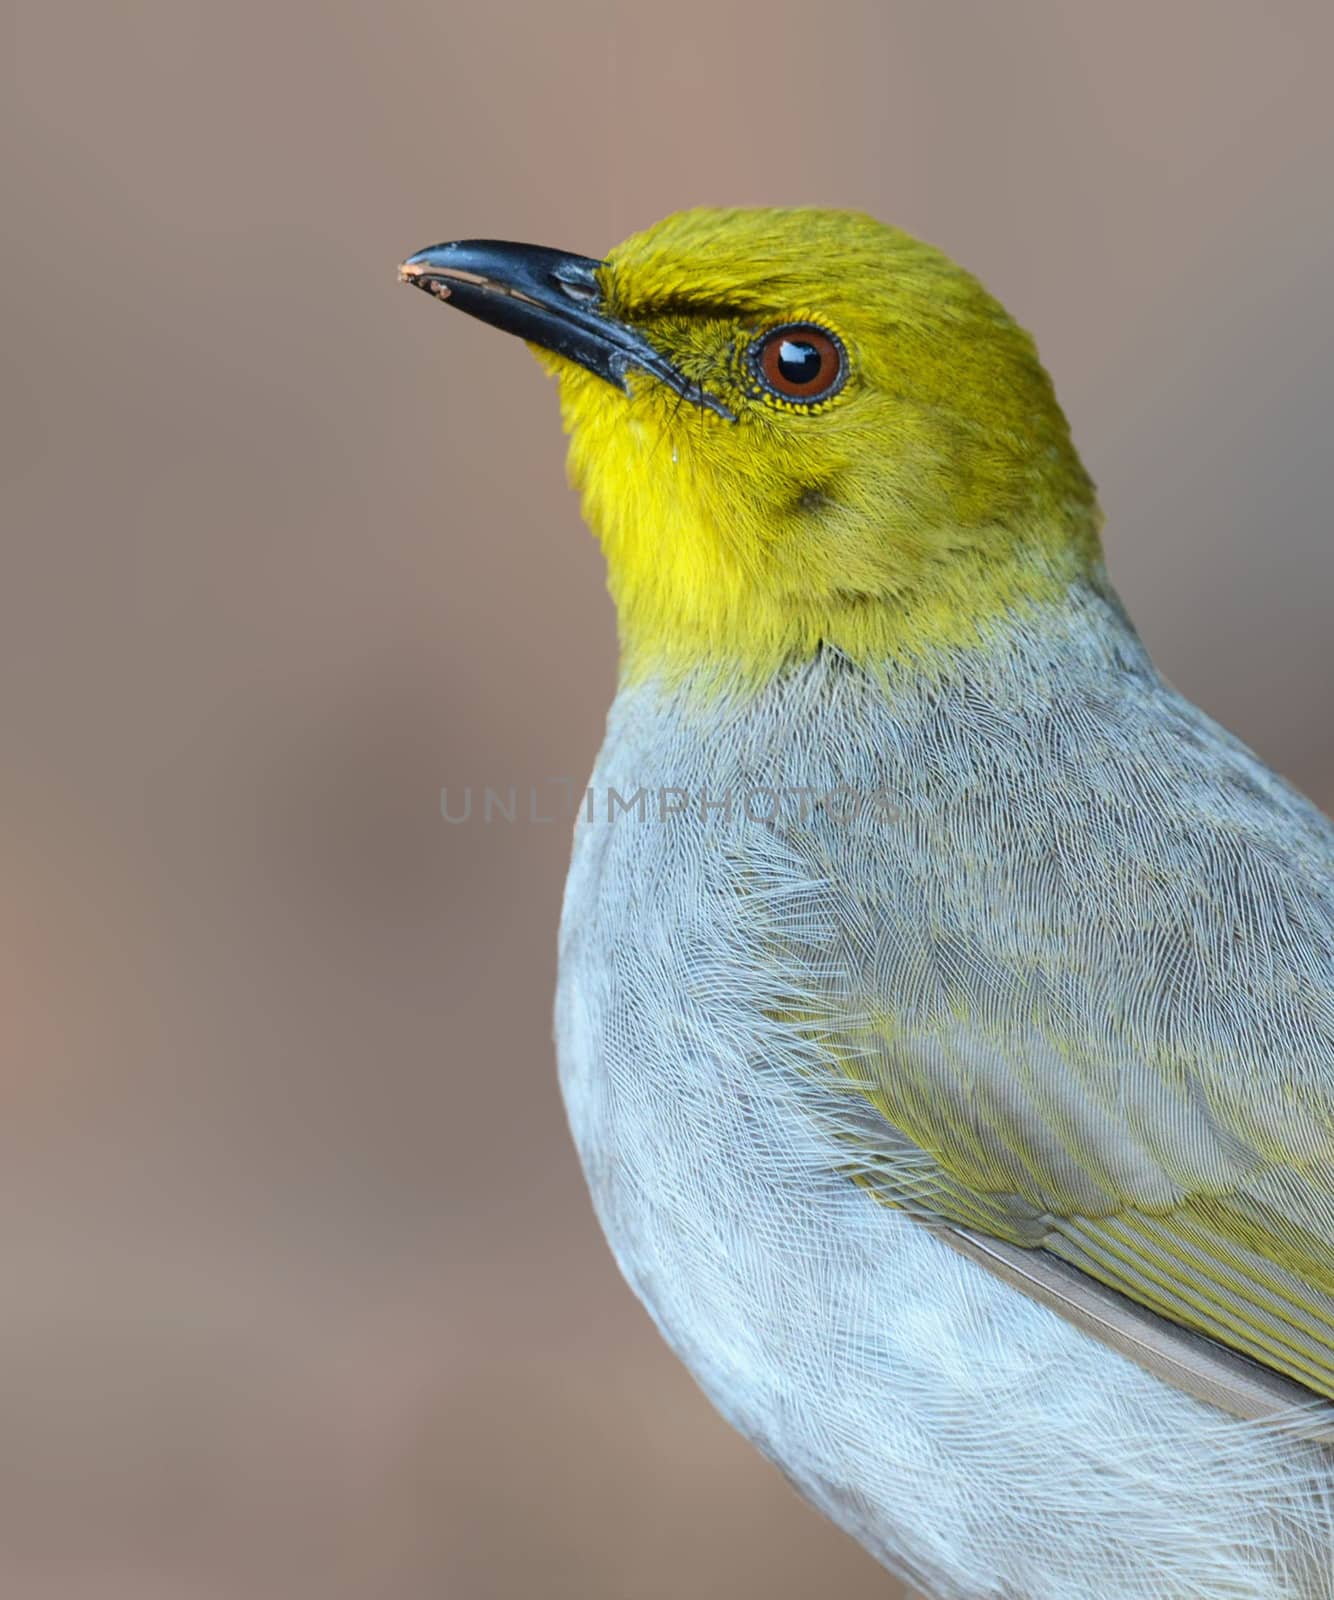 The Yellow-throated bulbul bird is a species of songbird. It is endemic to southern peninsular India.